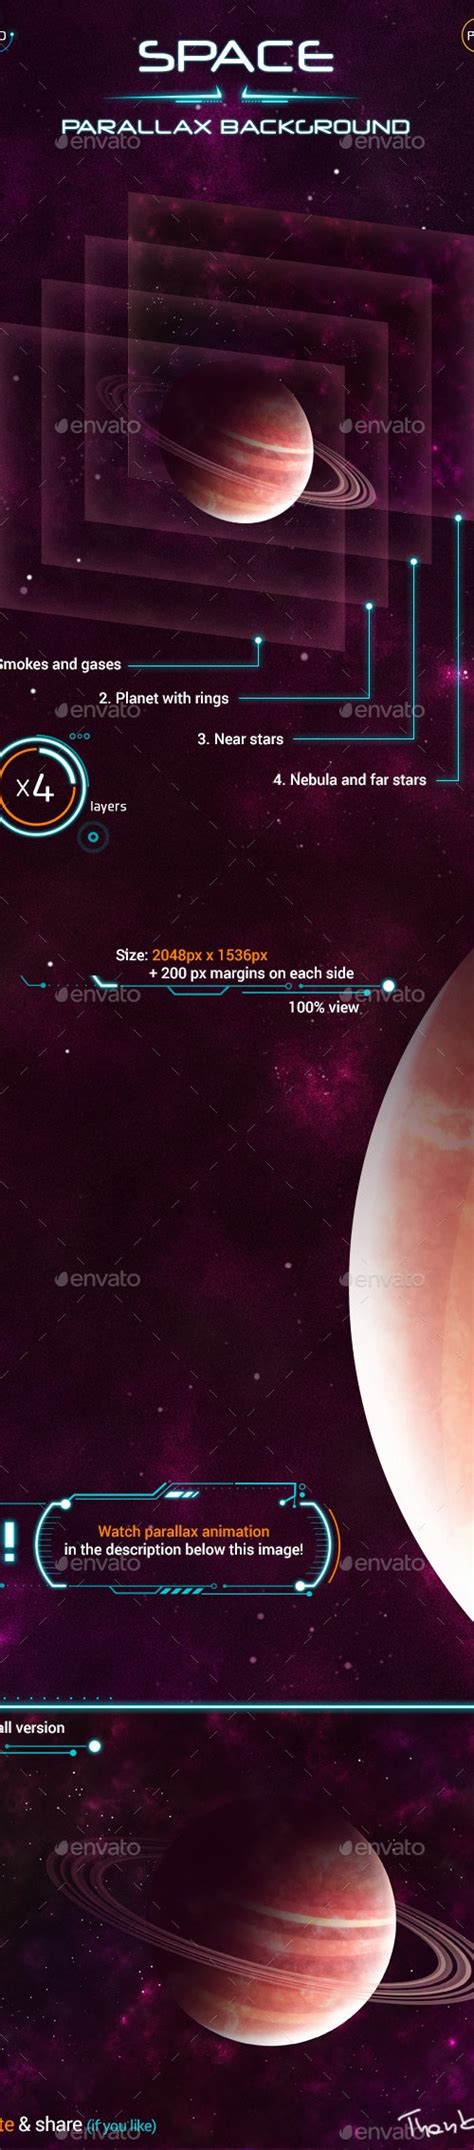 Space Parallax Background By Wowu Graphicriver